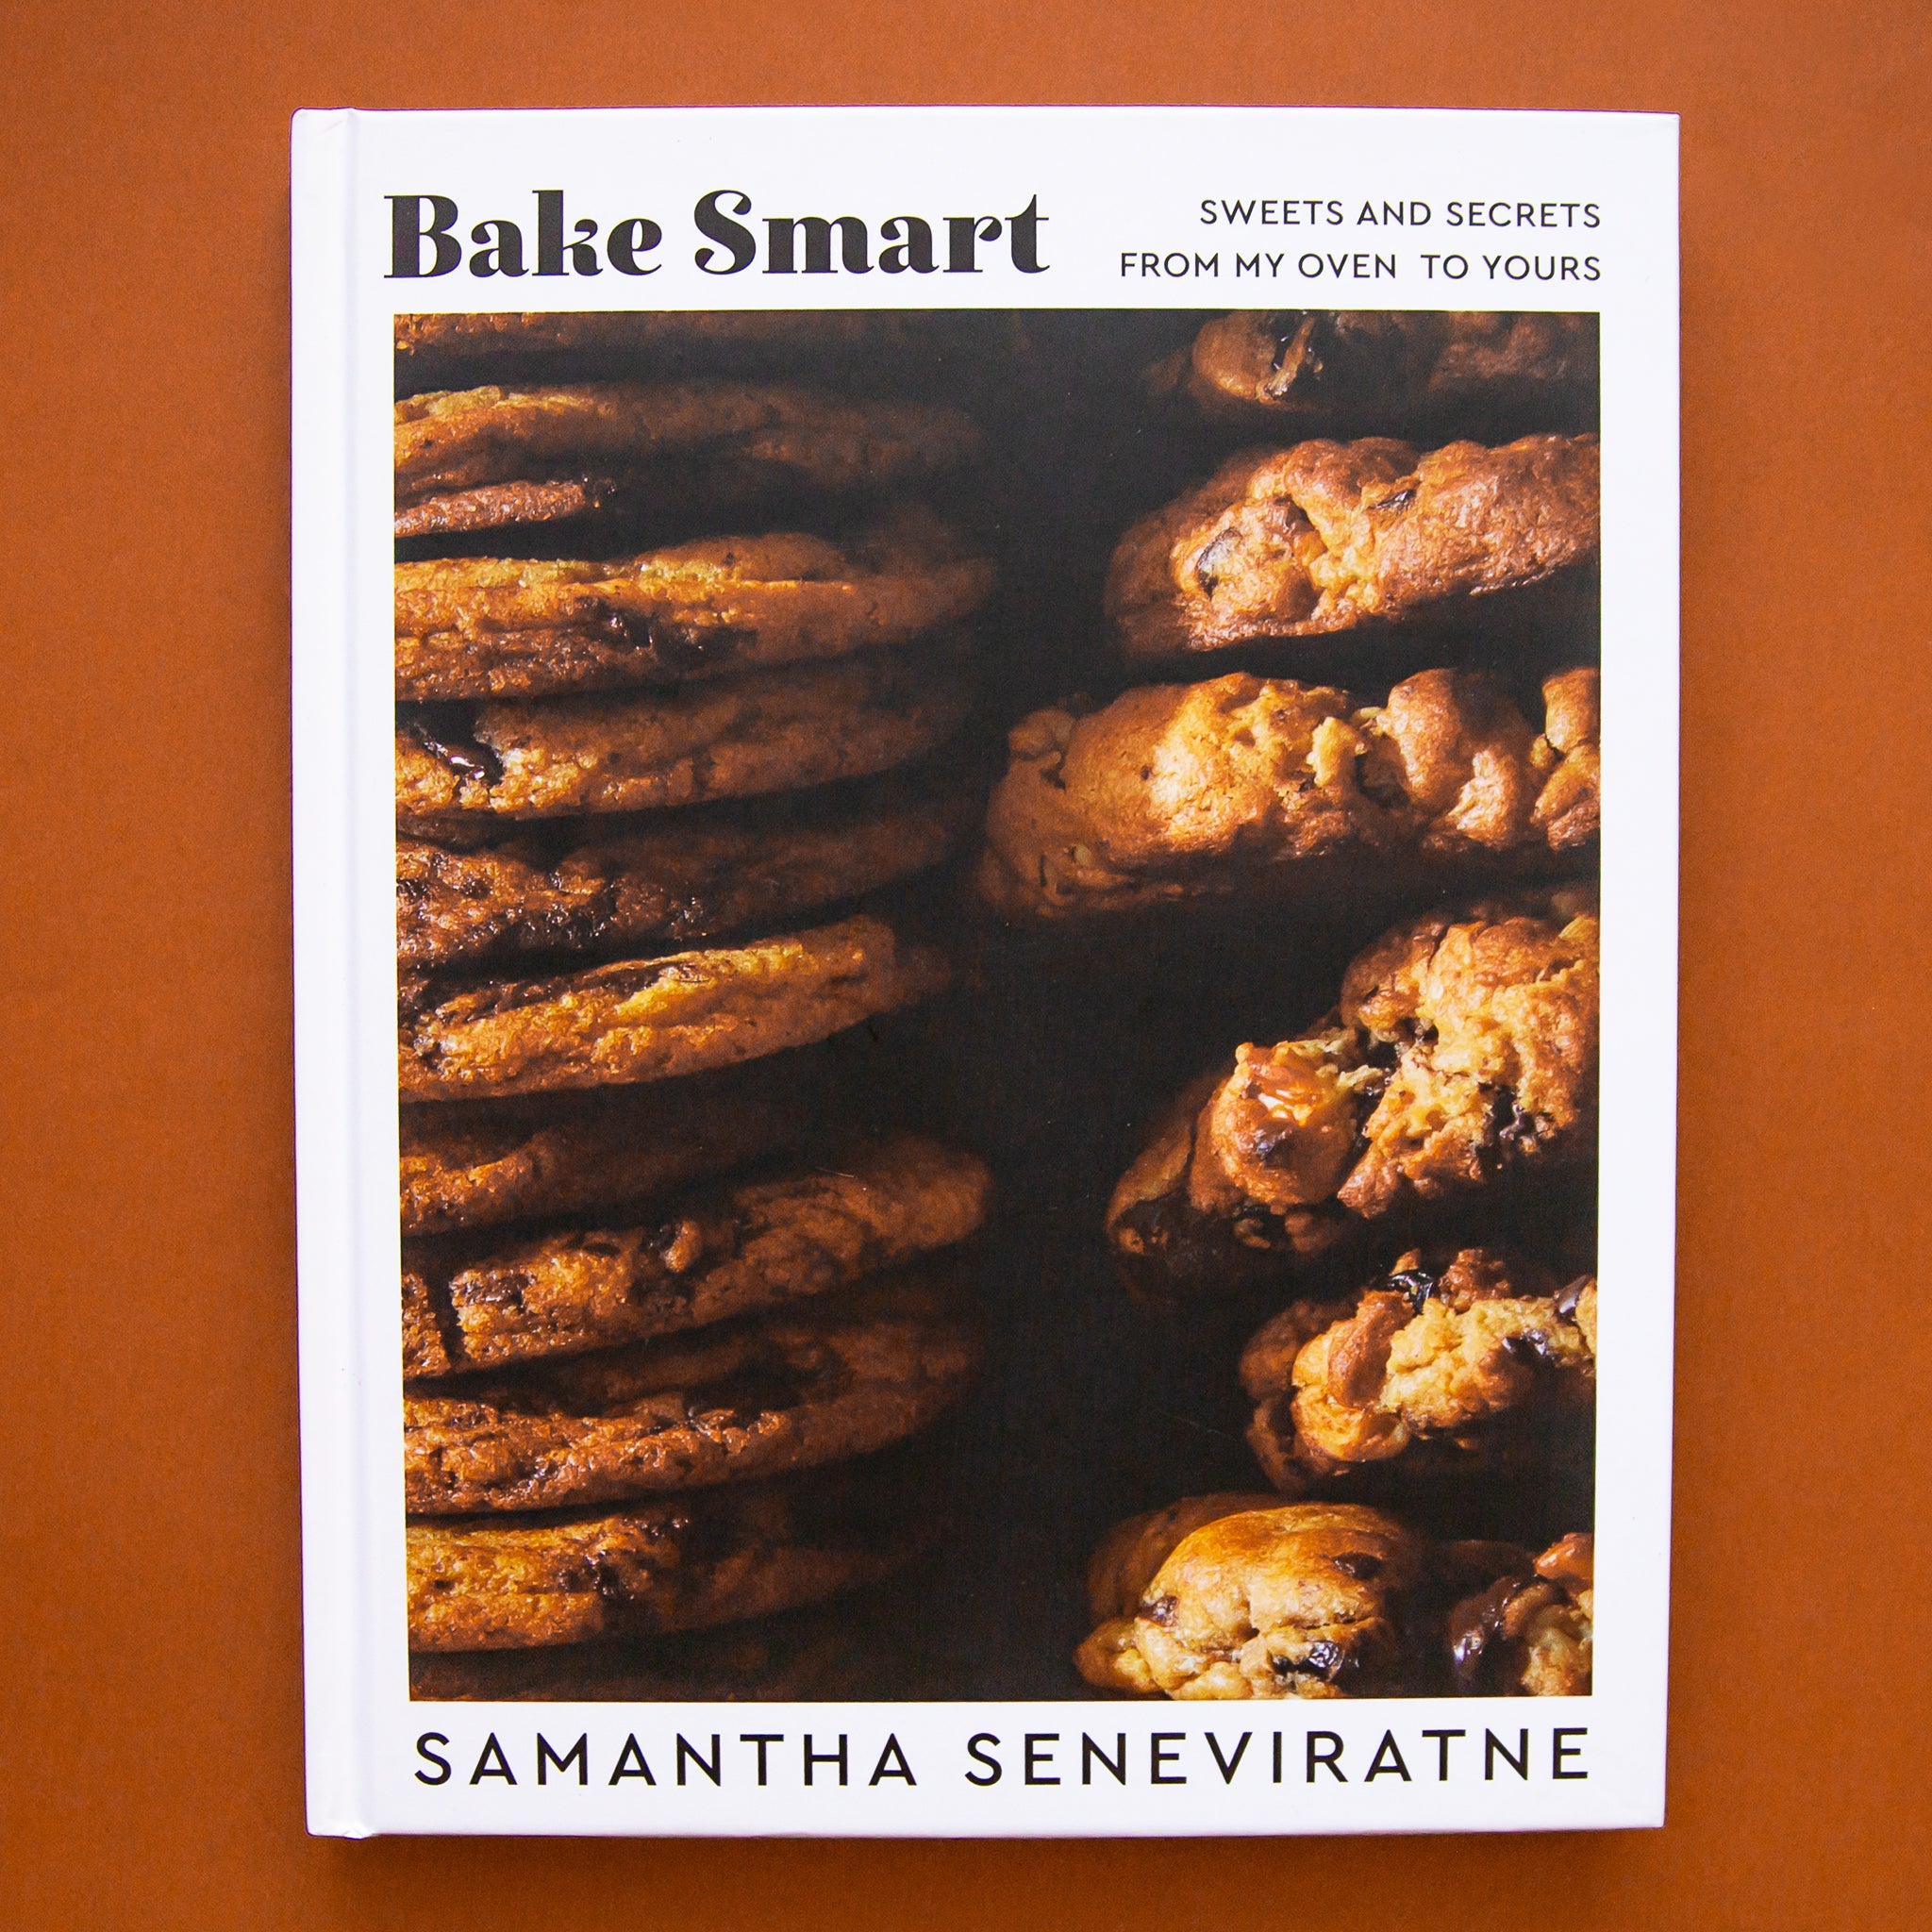 On a burnt orange background is a white book cover with a photo of cookies and the title on the top that reads, "Bake Smart Sweets And Secrets From My Oven To Yours". 